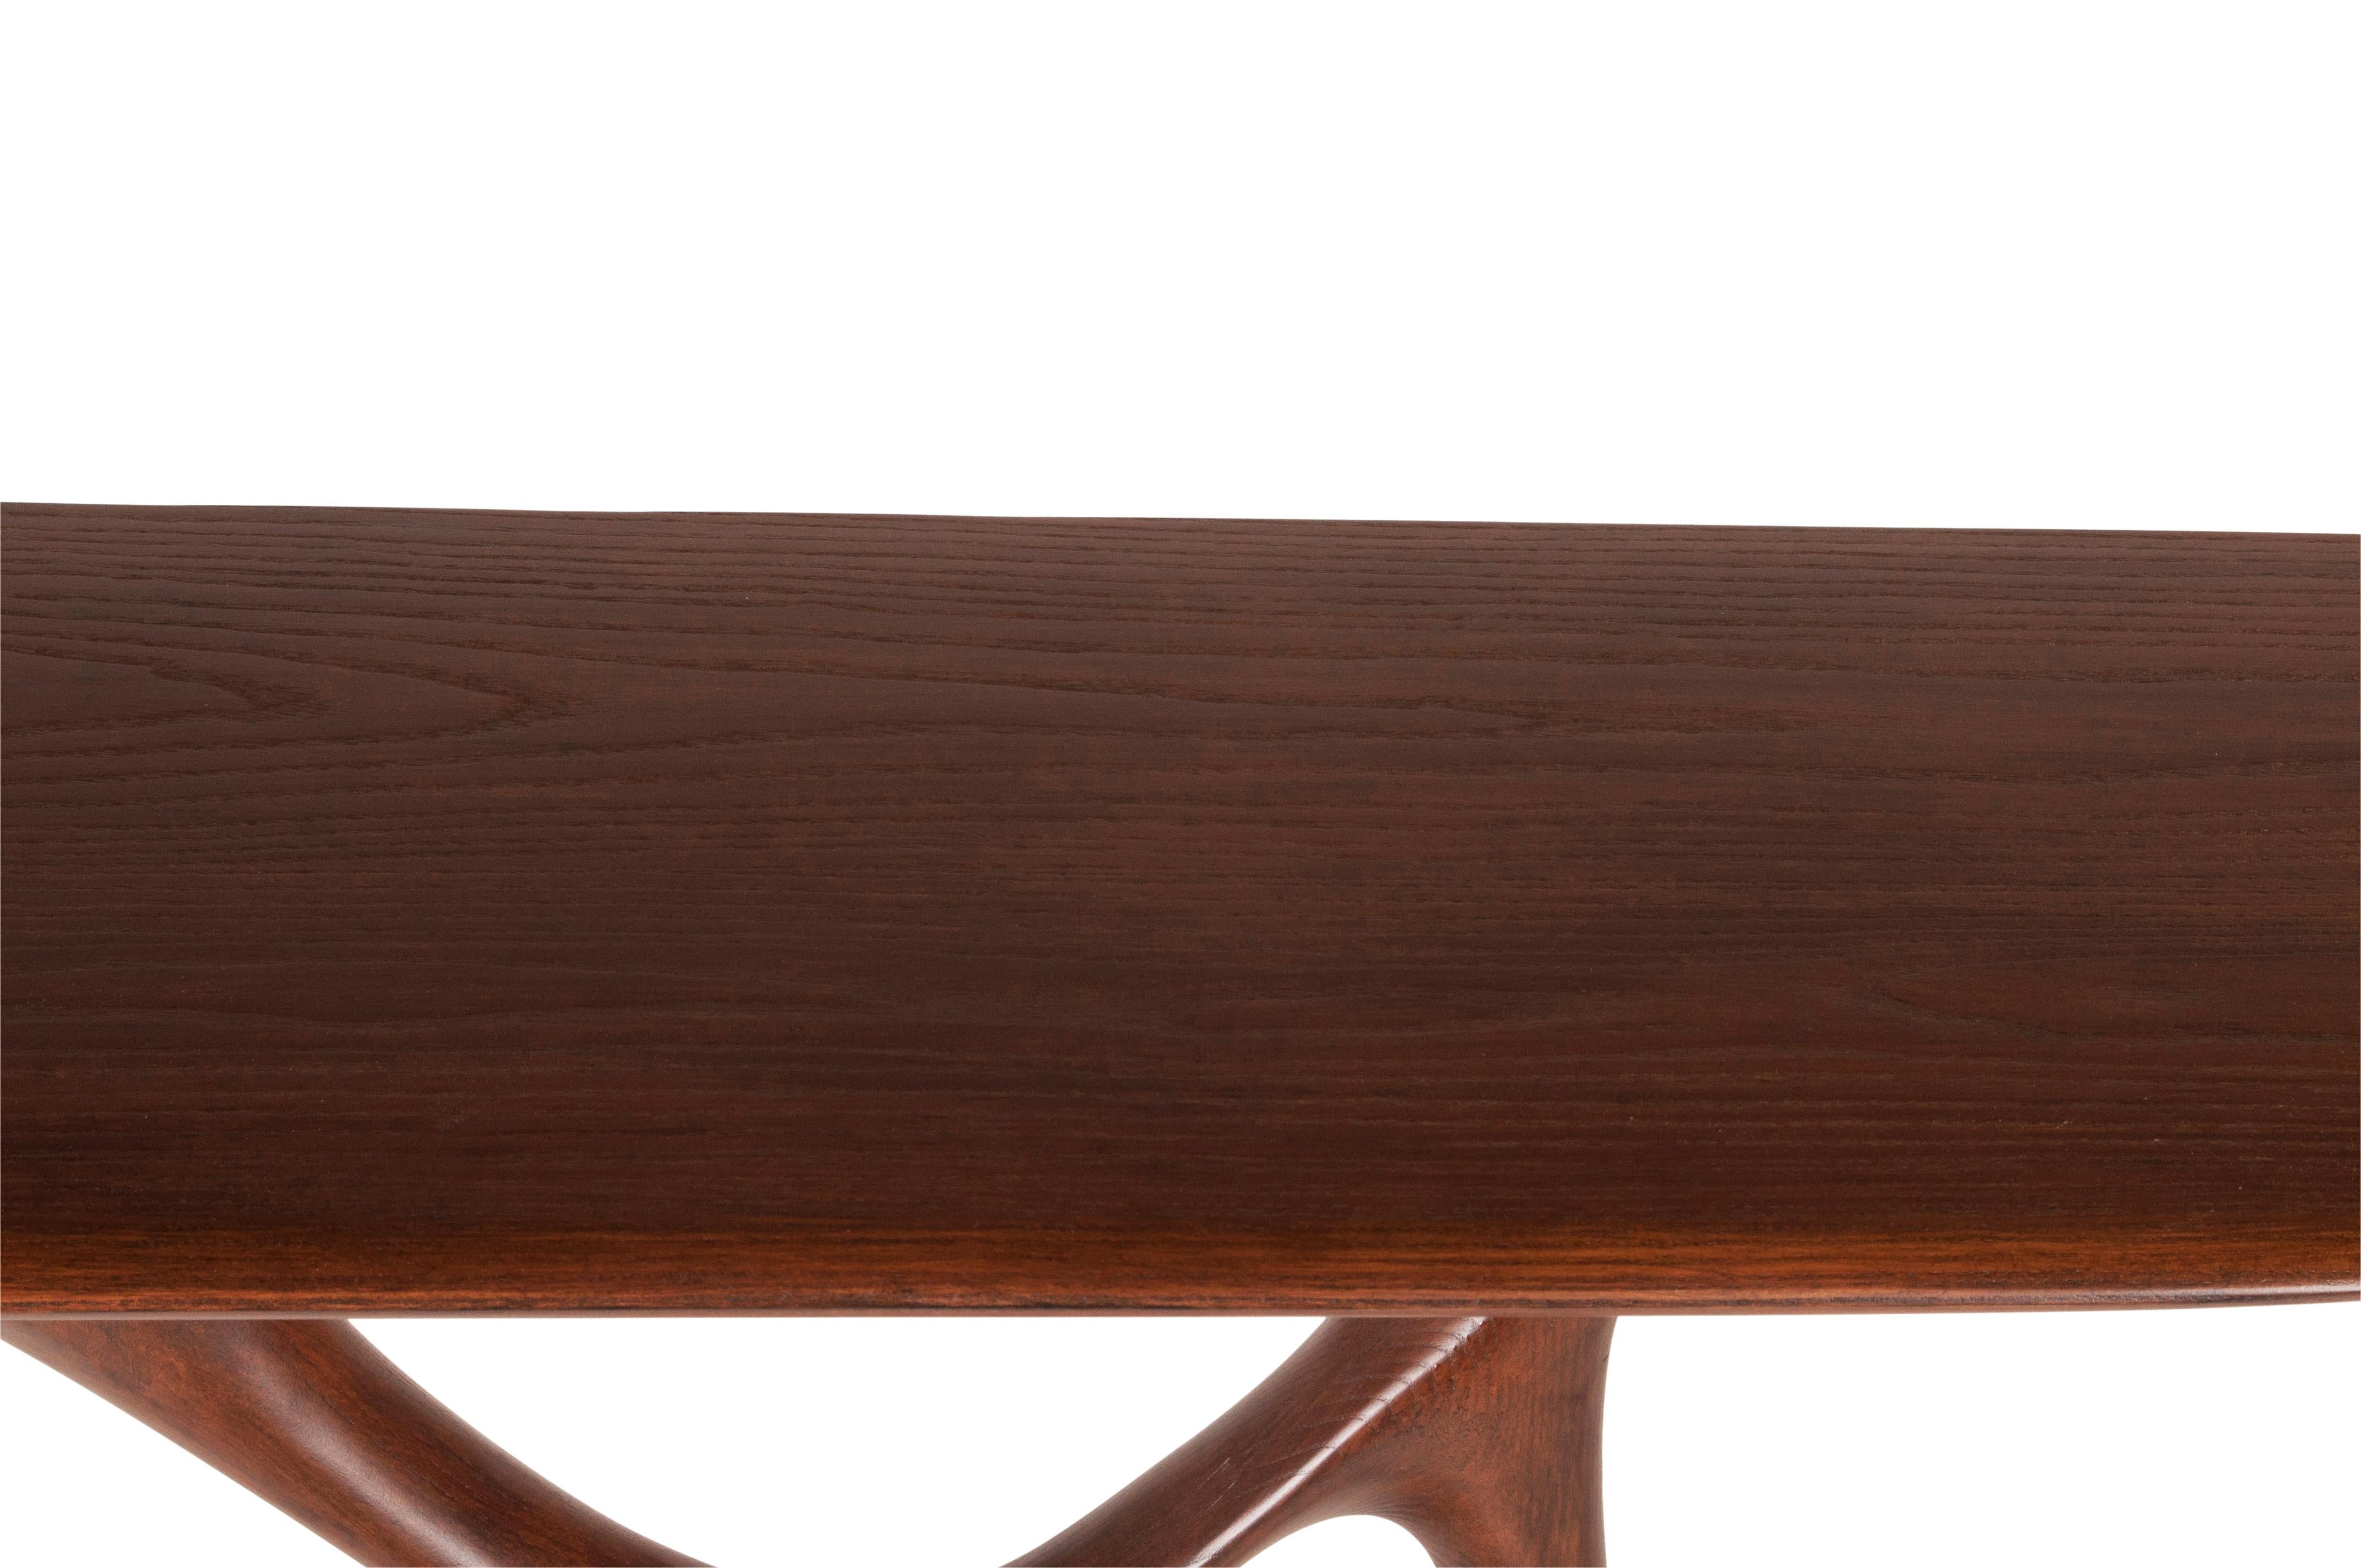 Amorph Anika Console table in Walnut stain on Ash wood In New Condition For Sale In Los Angeles, CA